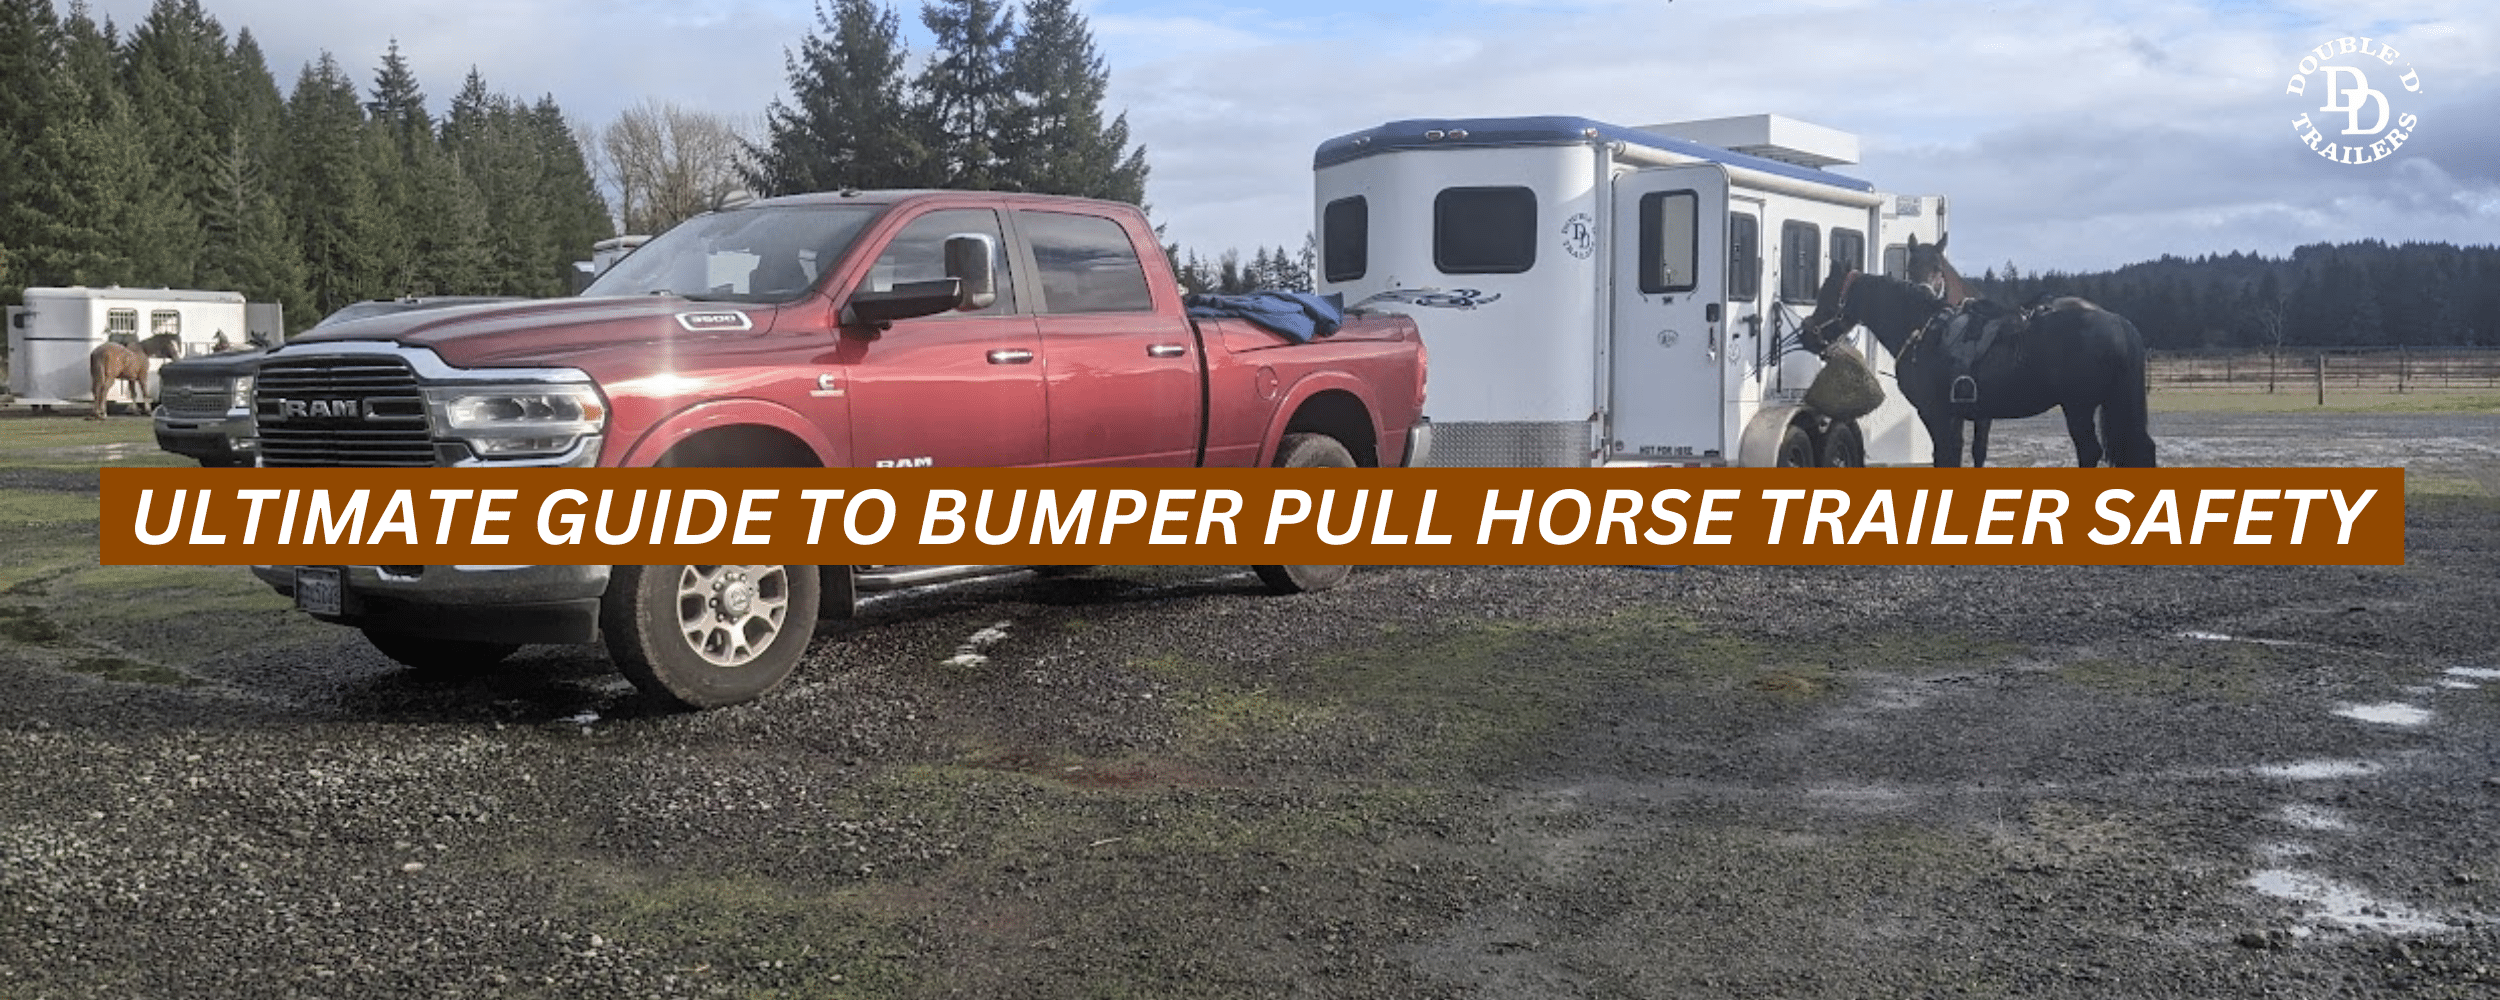 The Ultimate Guide to Bumper Pull Horse Trailer Safety: Key Tips & Expert Insights by Double D Trailers